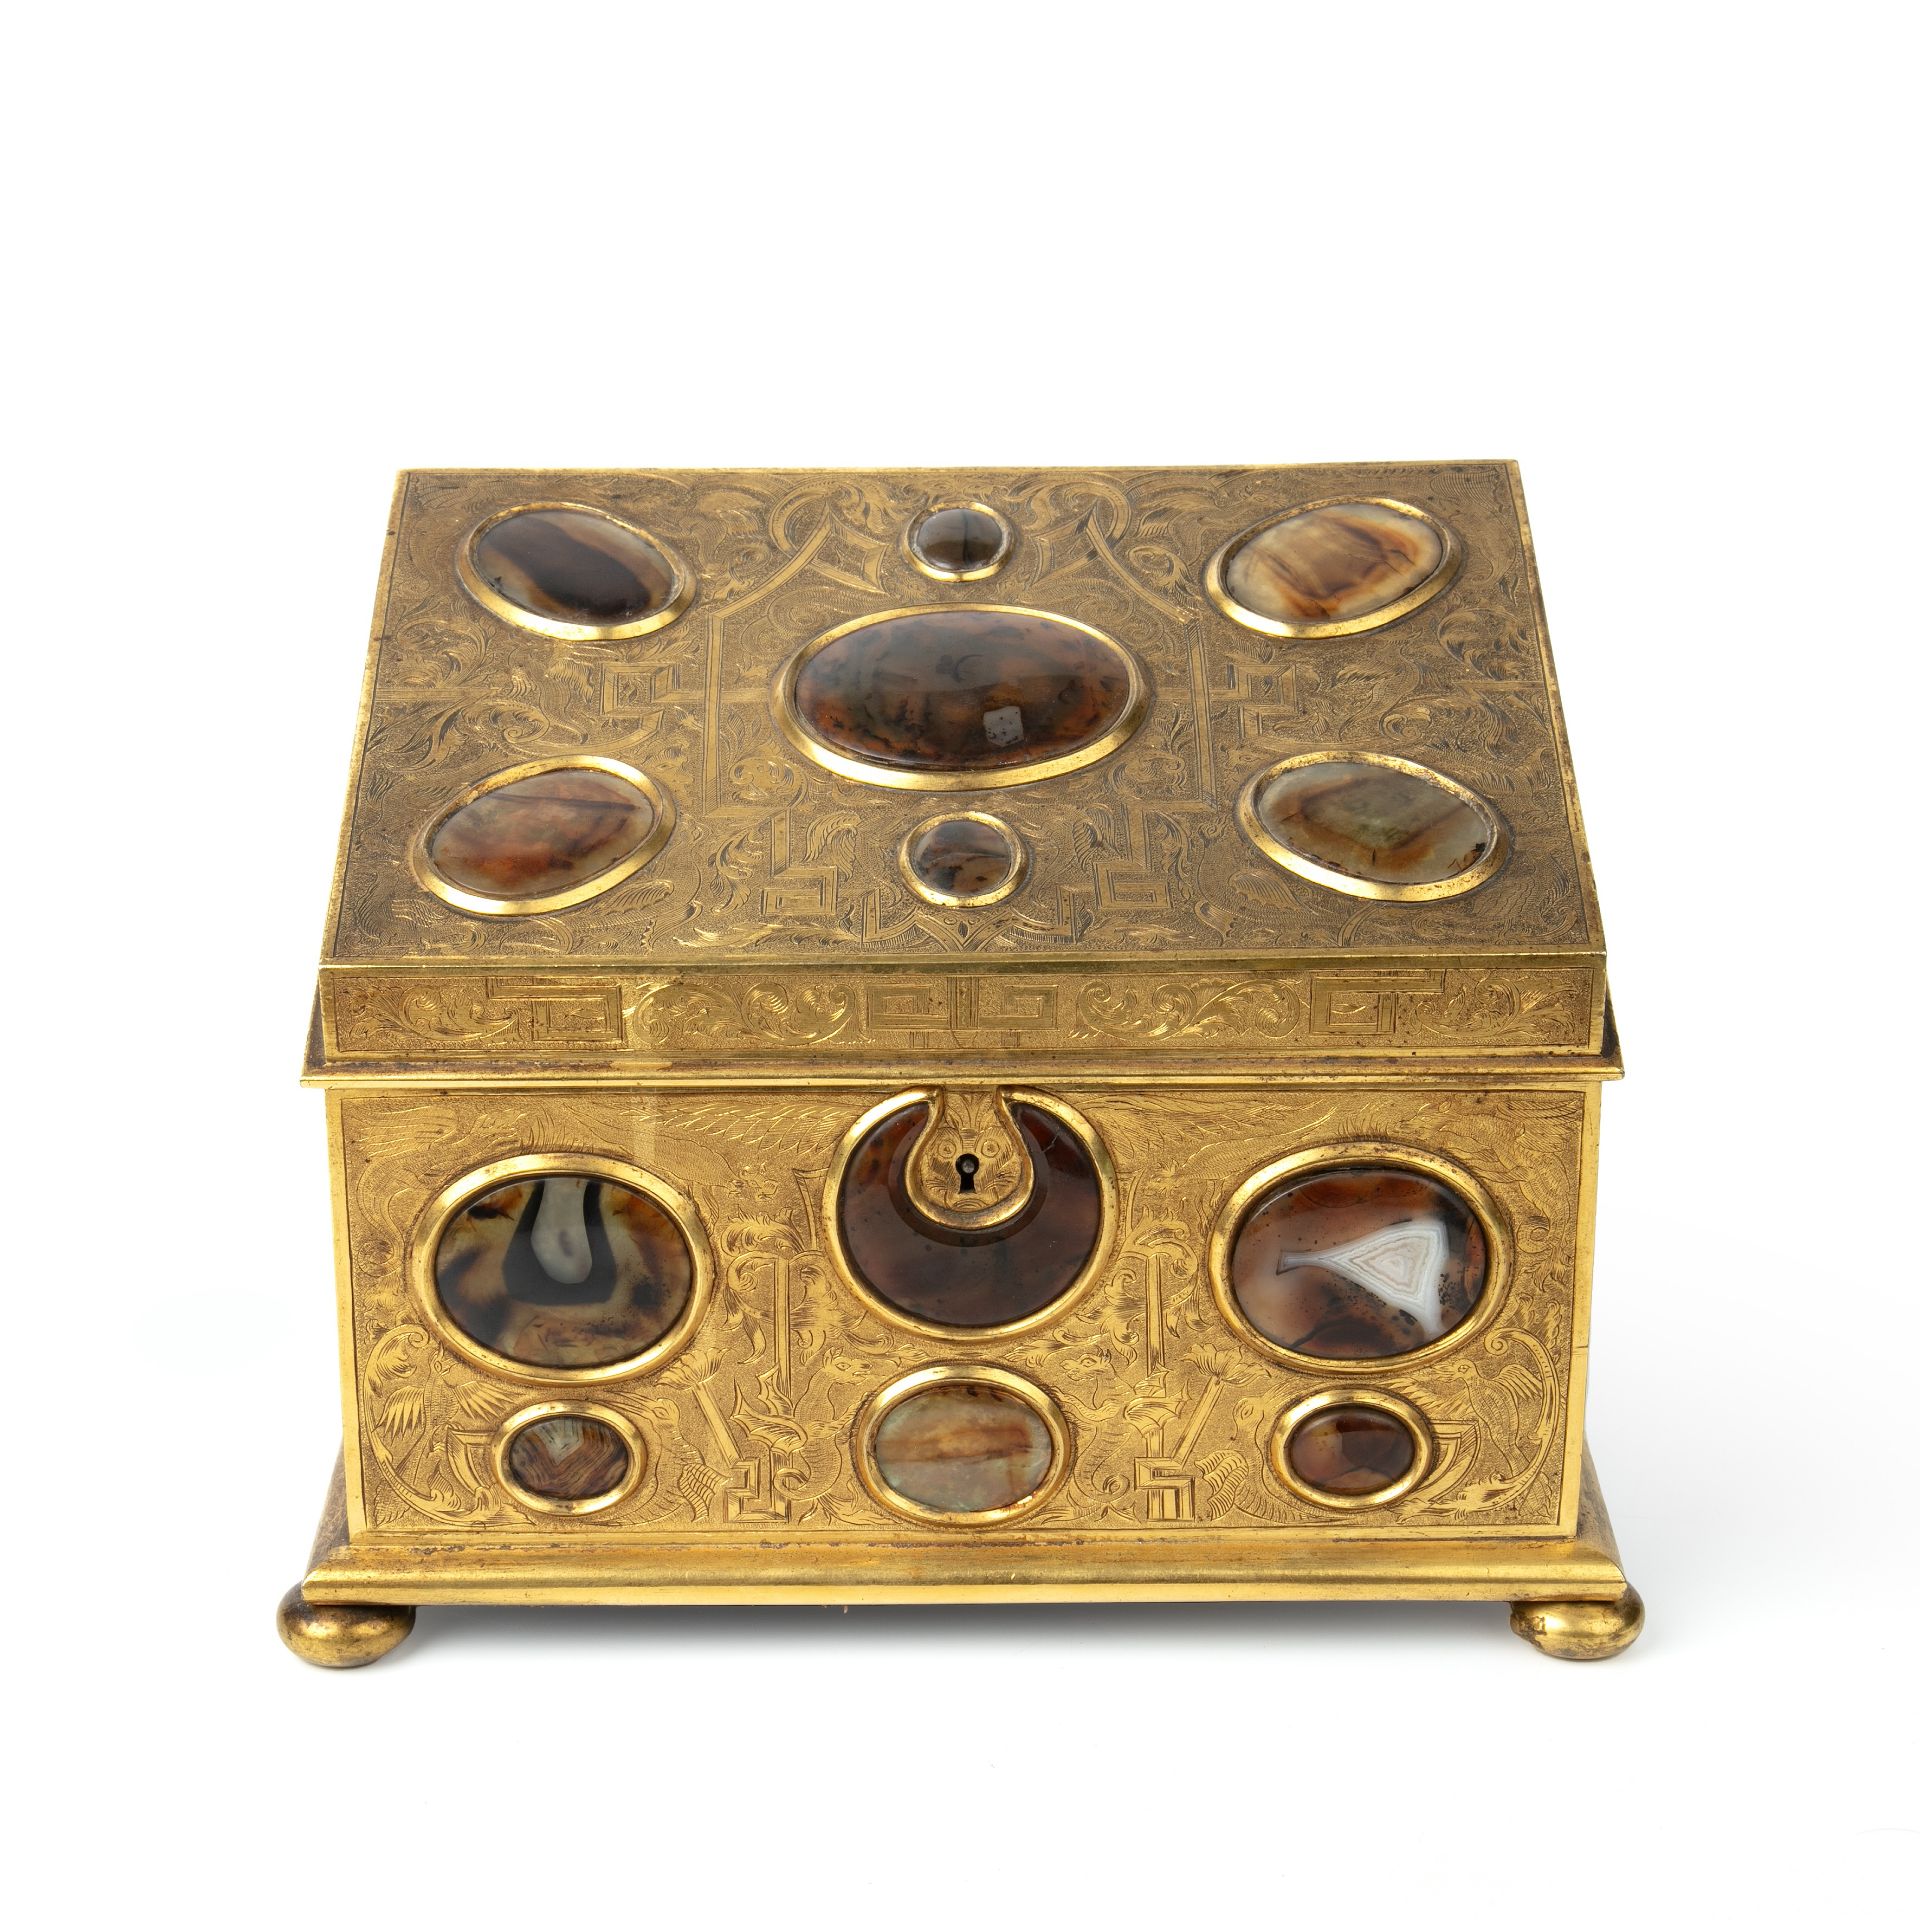 A 19th century correspondence gilt box with engraved decoration and inset cabochon stones hardstones - Bild 2 aus 25